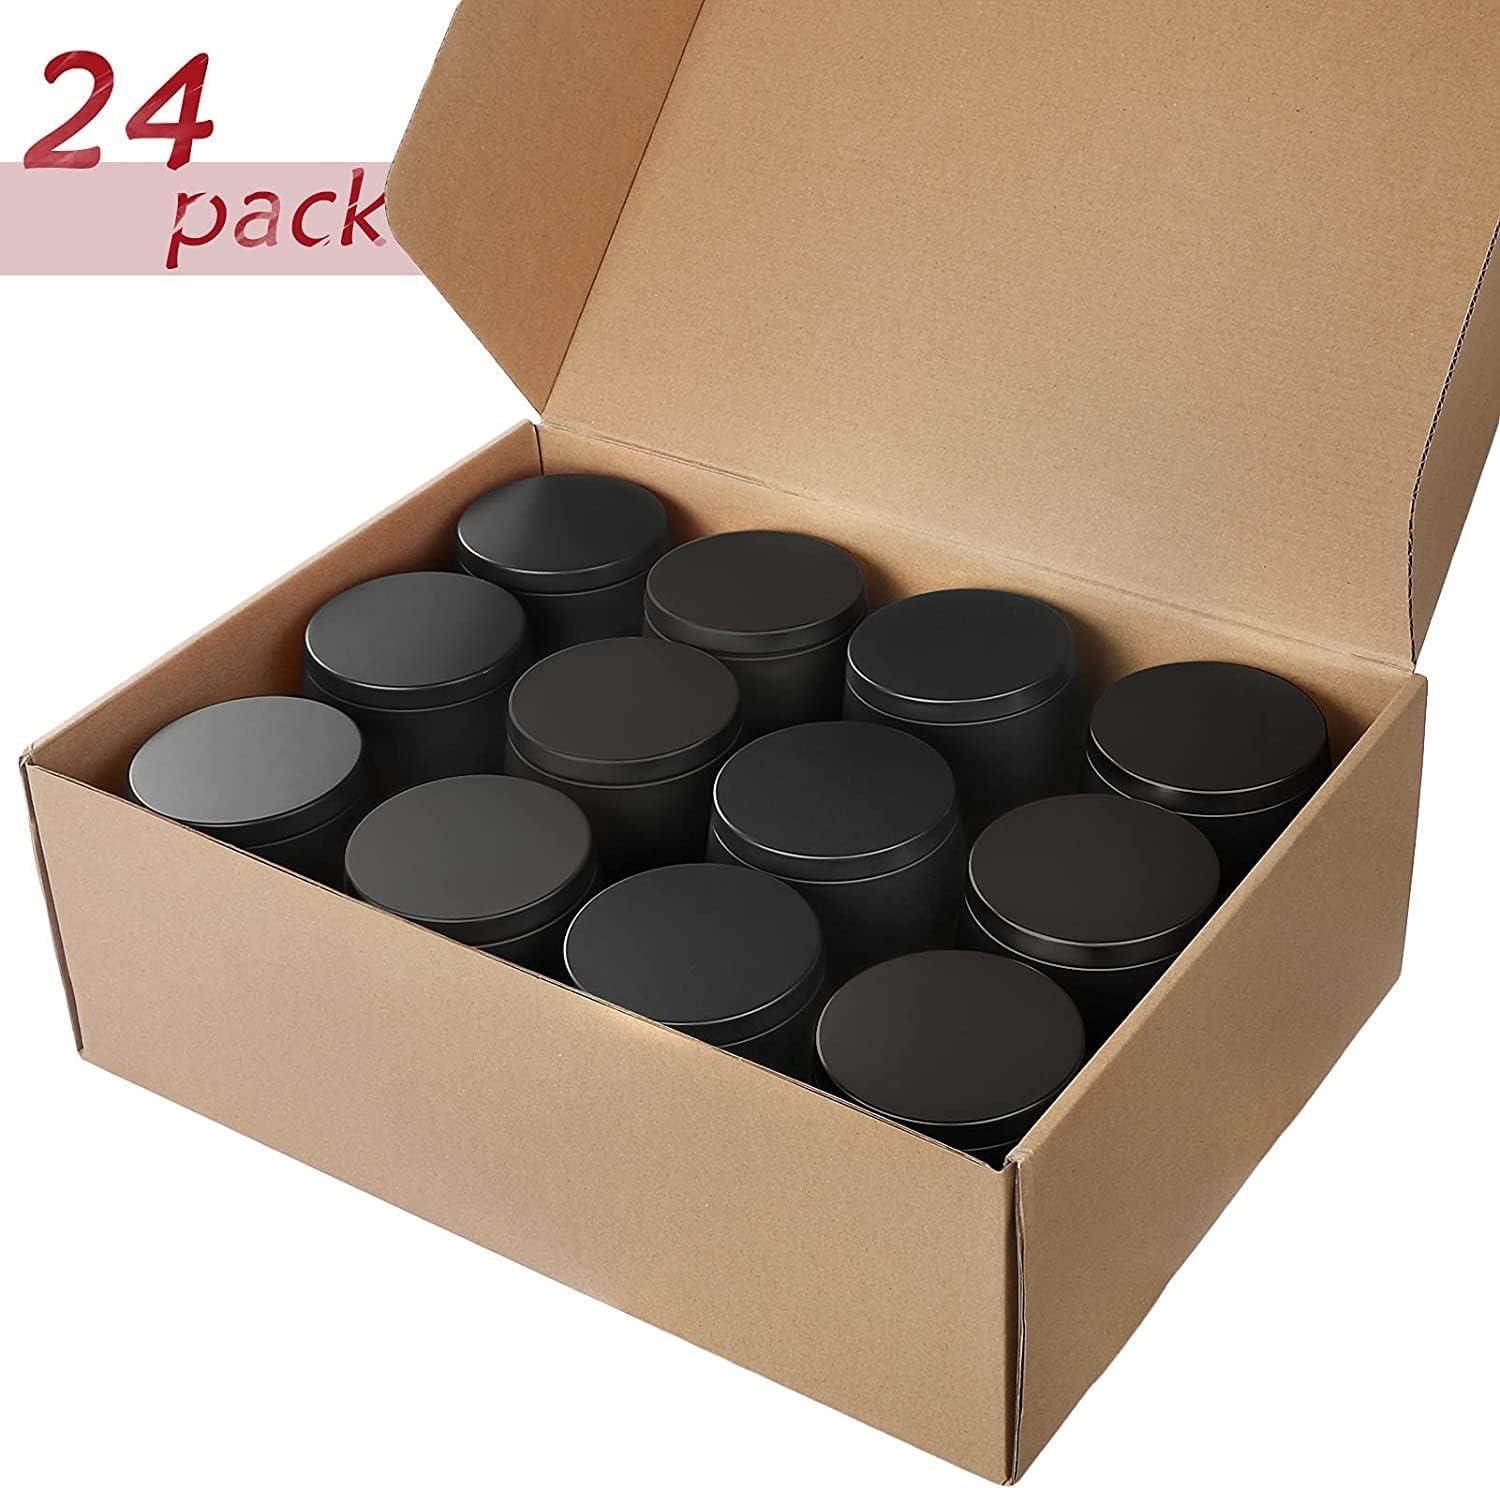 Blisshelf 24 Pack Black Candle Tins 8 oz, Candle Jars for Making Candles,  Tinplate Candle Tins with Lids Bulk, Candle Containers for DIY Candle  Making, Candle Making Kit, Storage Tins, 24 Count